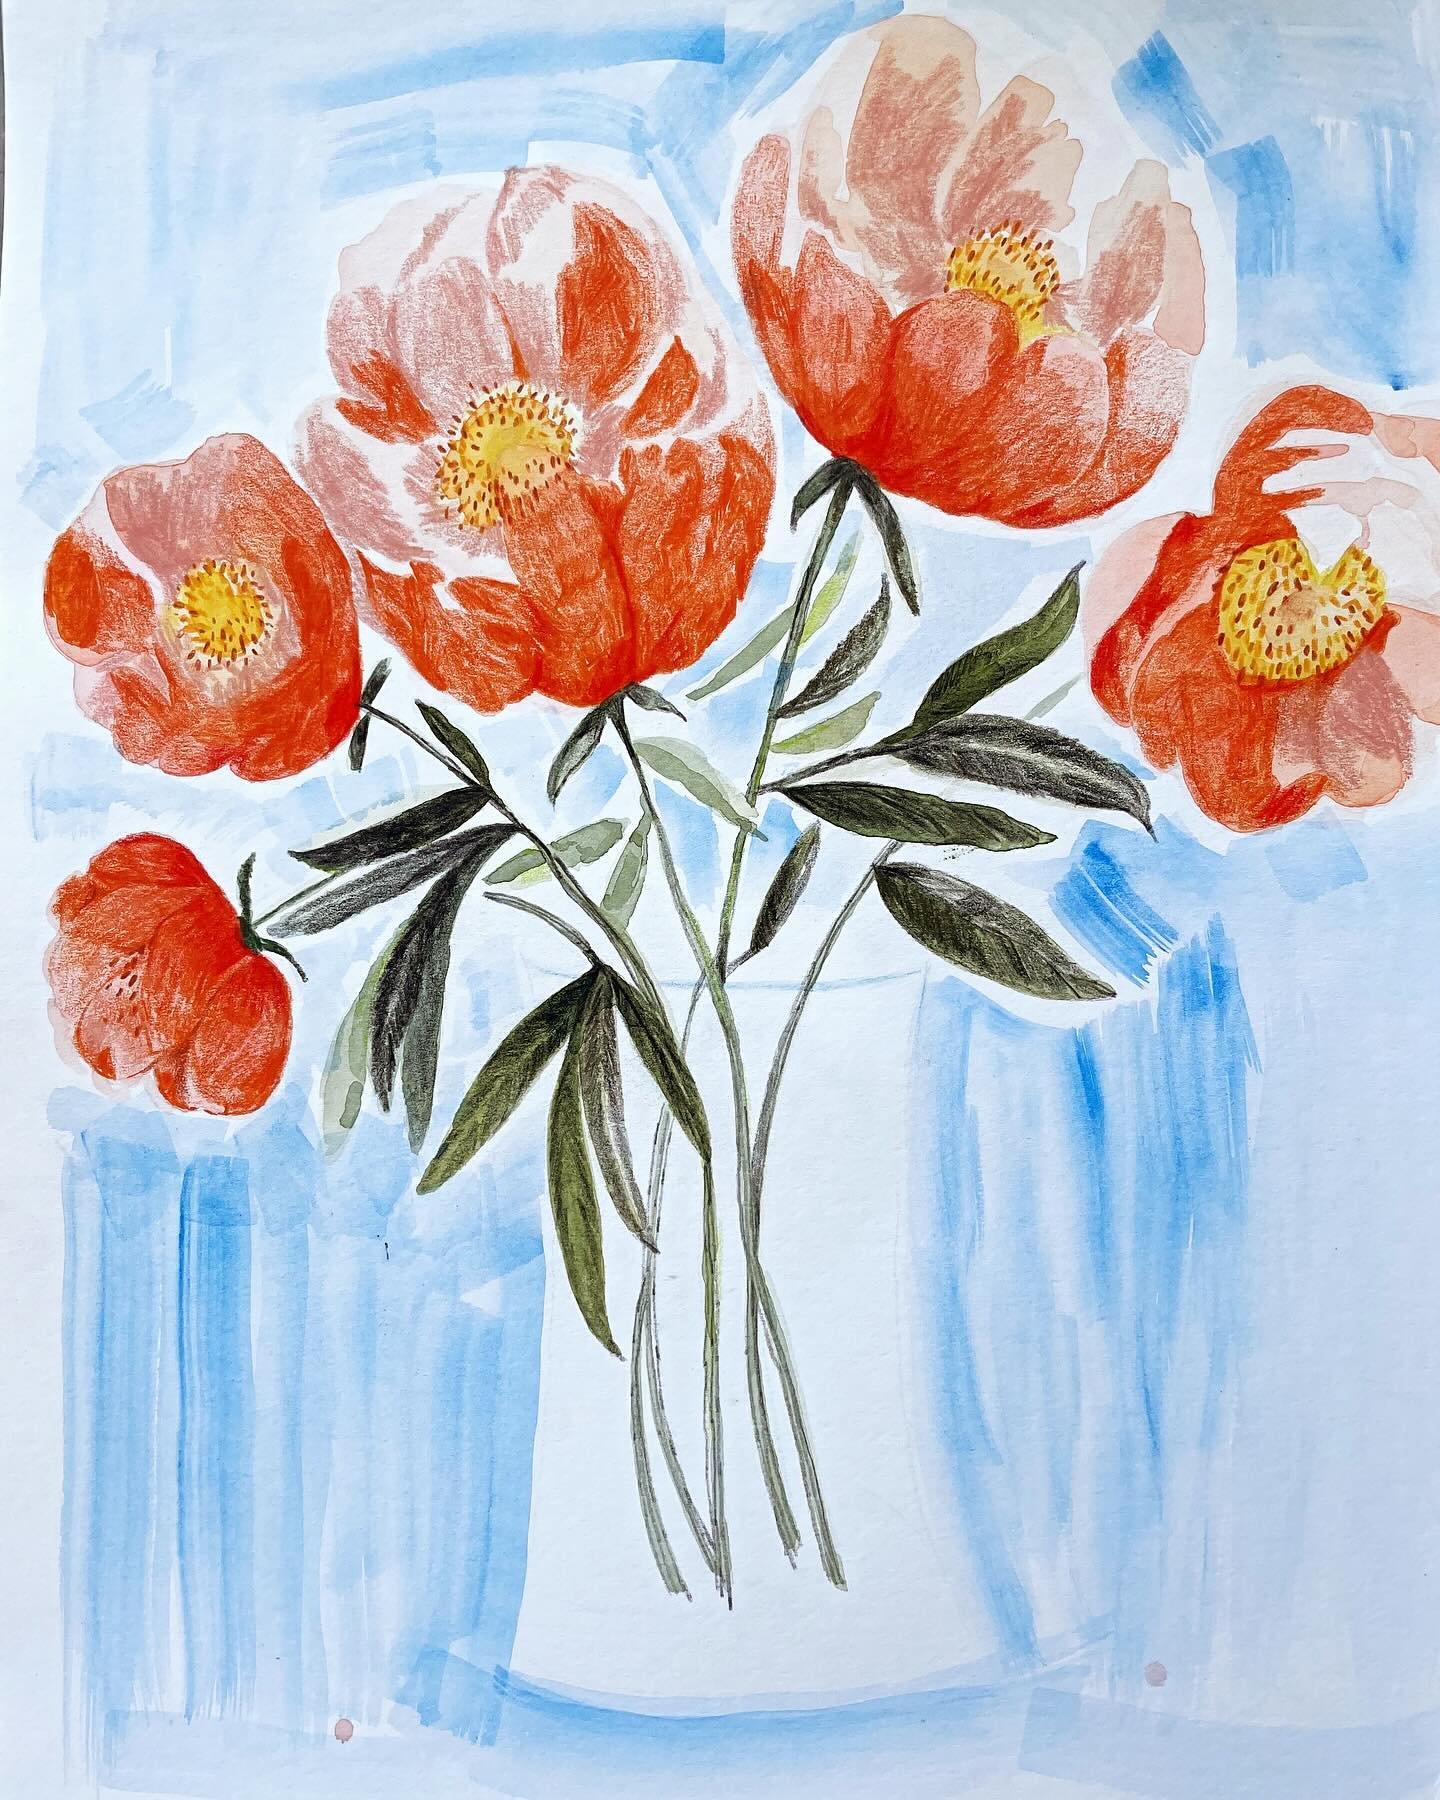 Monday Inspiration.✨

It&rsquo;s that season again&hellip;Peony Season! I finally finished this pencil and watercolor painting in celebration. It only took me a few years to complete.🤣✨

Have you ever started a creative project and put it in a drawe